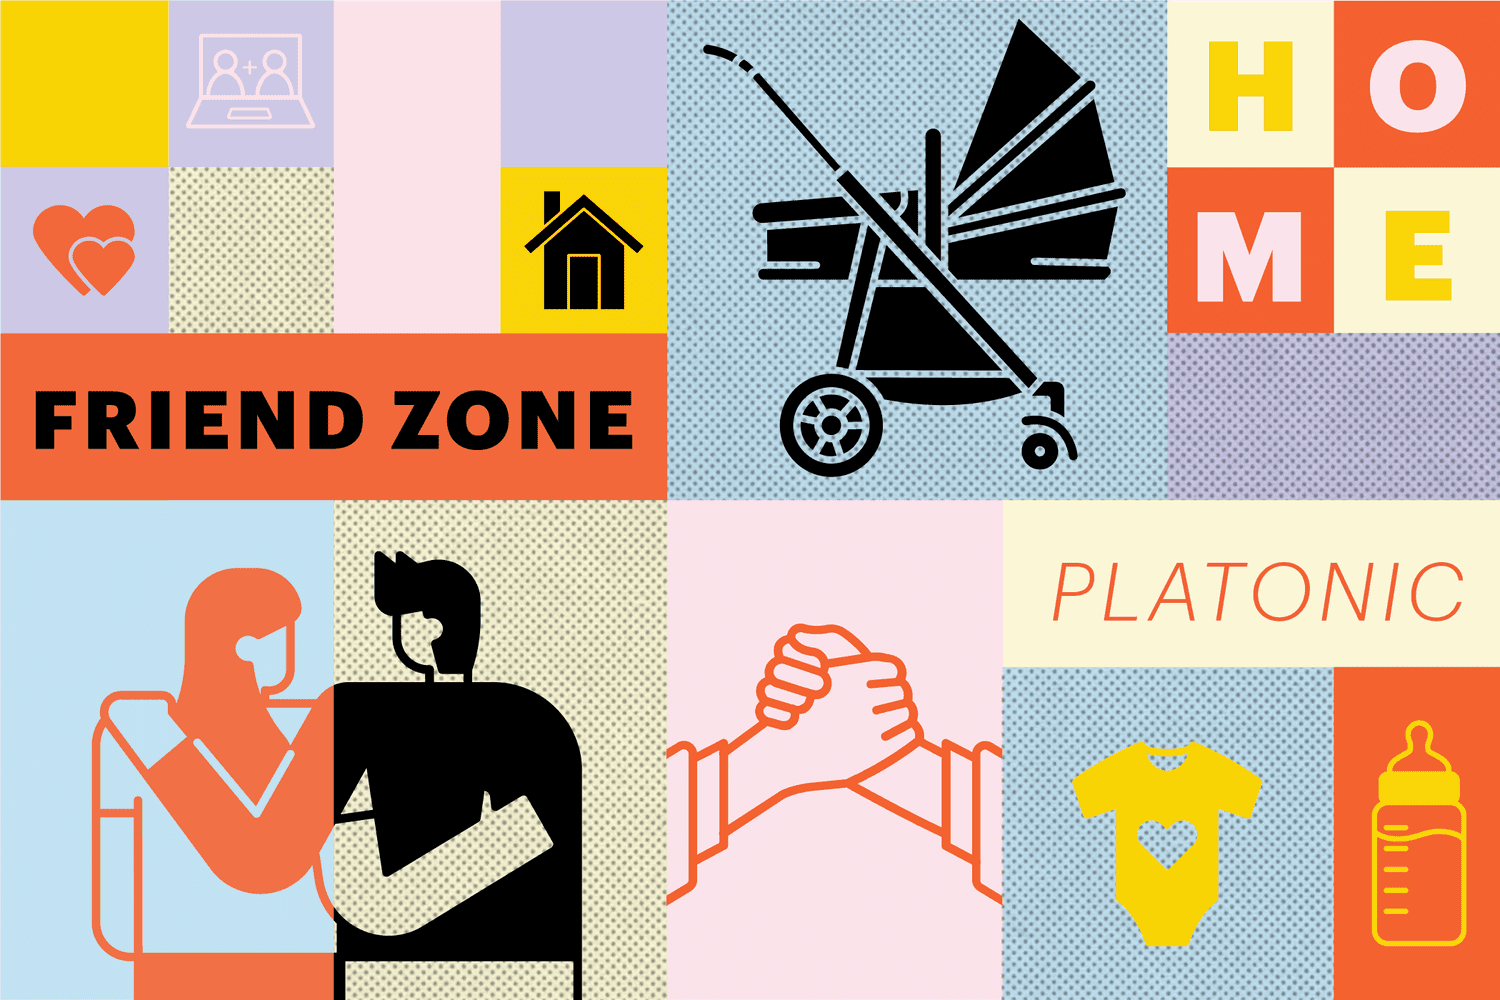 Illutration of couple and carriage with words "friend zone" and "platonic"